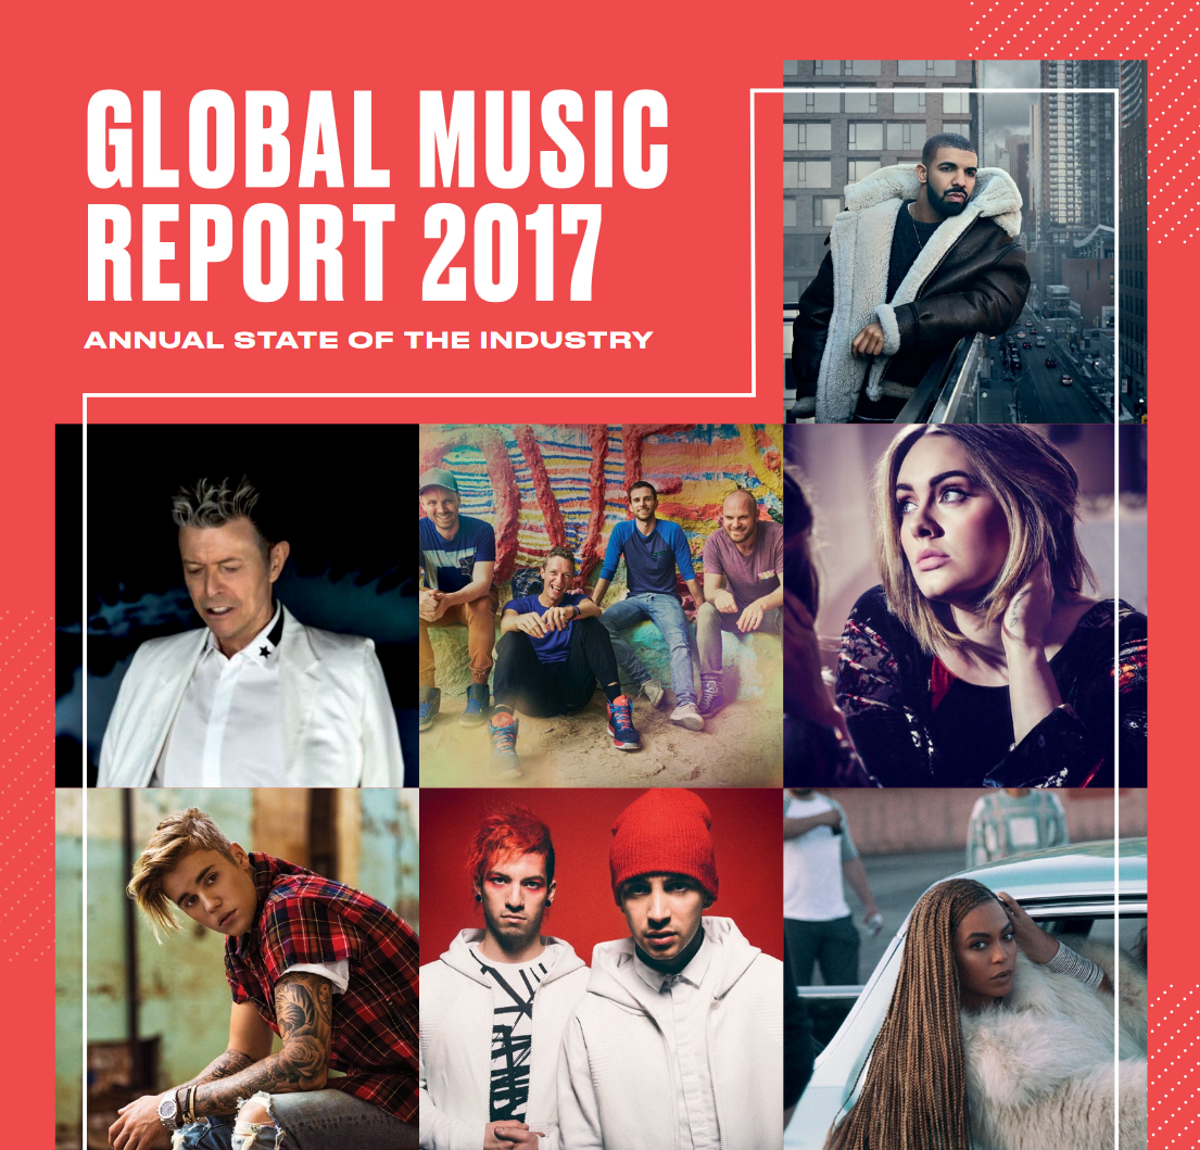 IFPI Global Music Report shows recorded music revenues up by 5.9 bpi